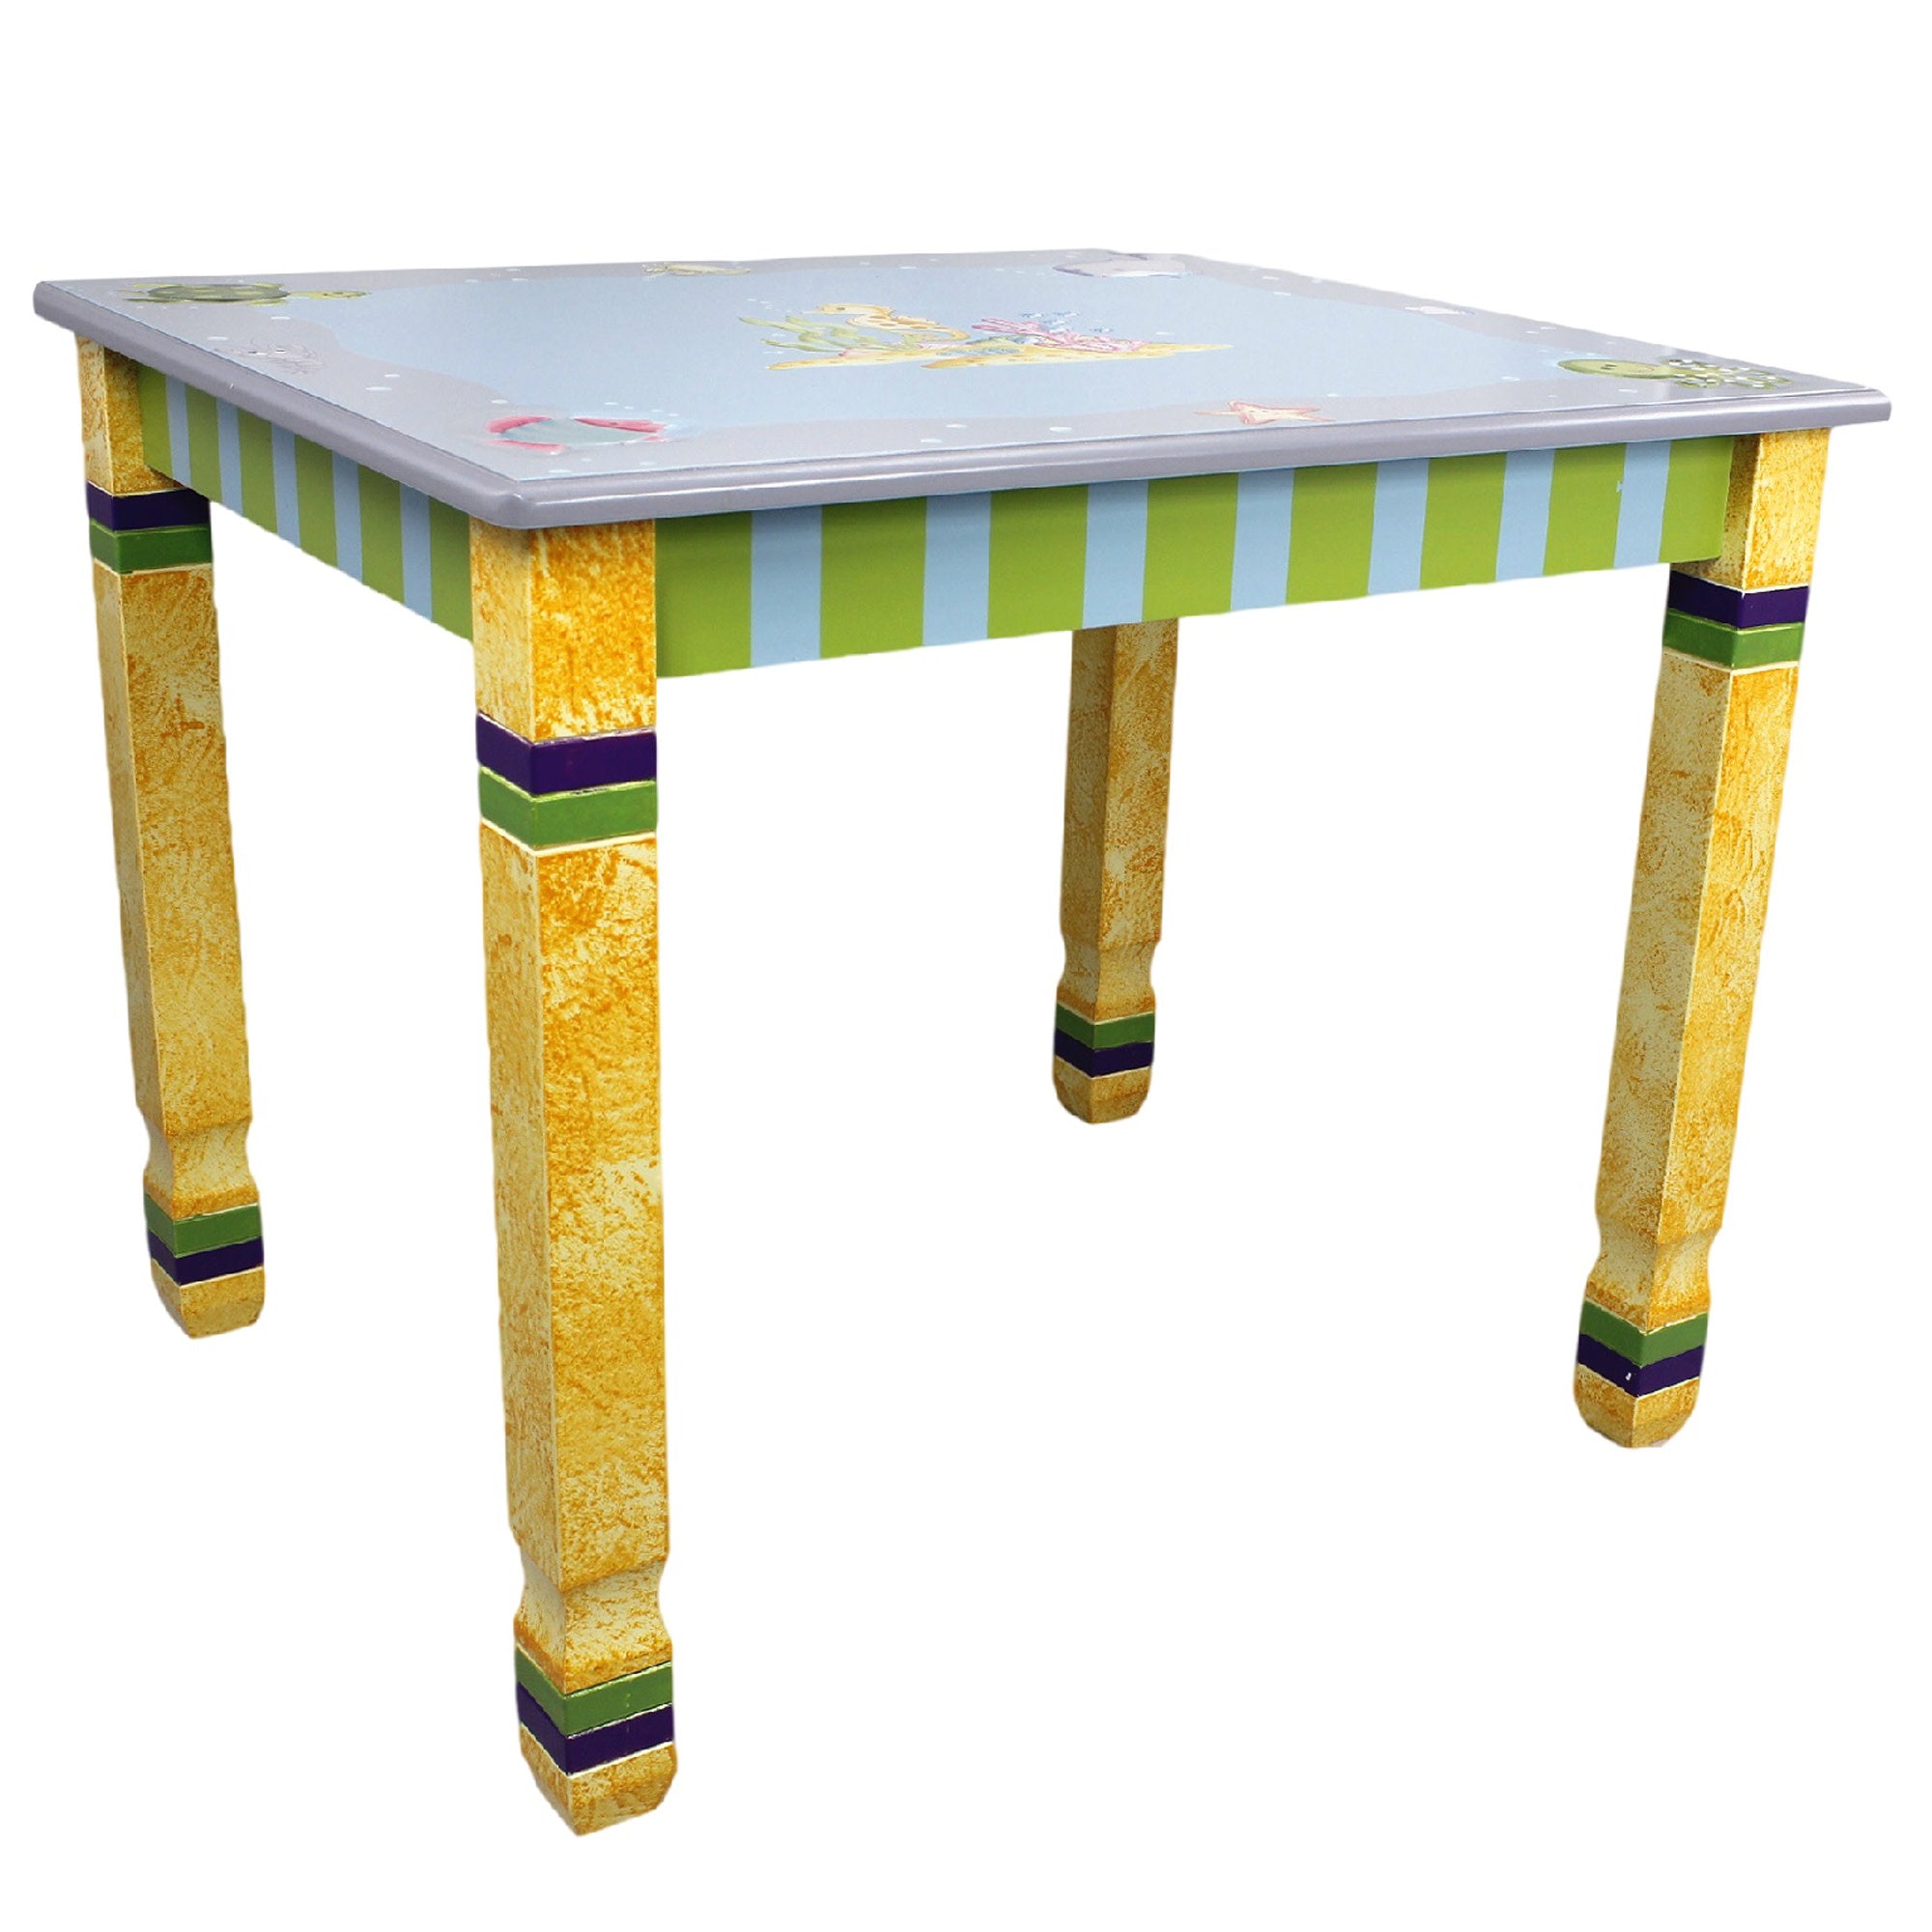 Fantasy Fields Toy Furniture Under the Sea Table with Hand-Carved Distressed Sponge Finish Legs, Striped Apron, & Hand-Painted Sea Creature Top, Blue/Yellow